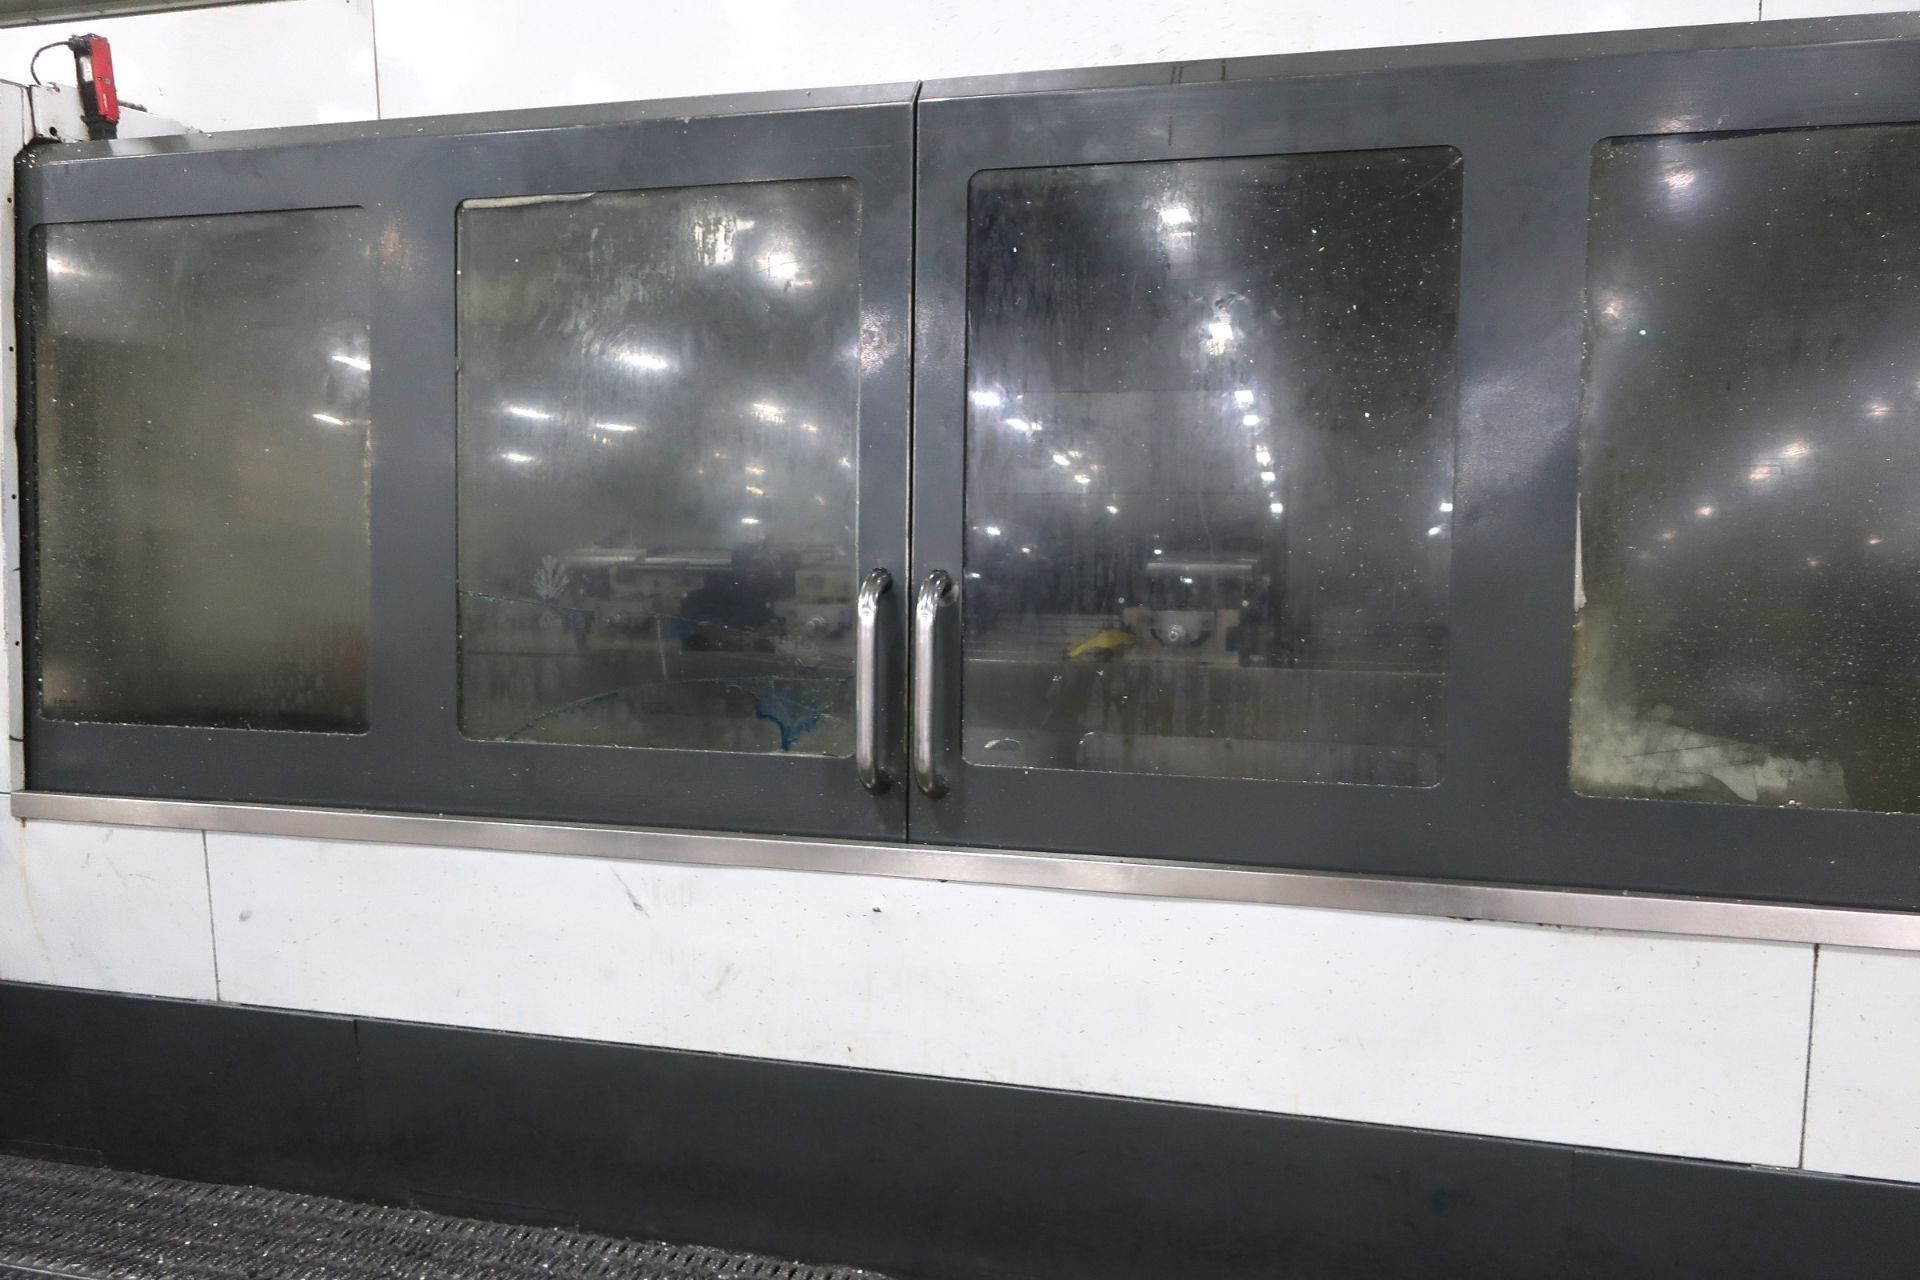 28" x 120" HAAS VF10/40 CNC VERTICAL MACHINING CENTER, NEW 2013 - Image 12 of 21